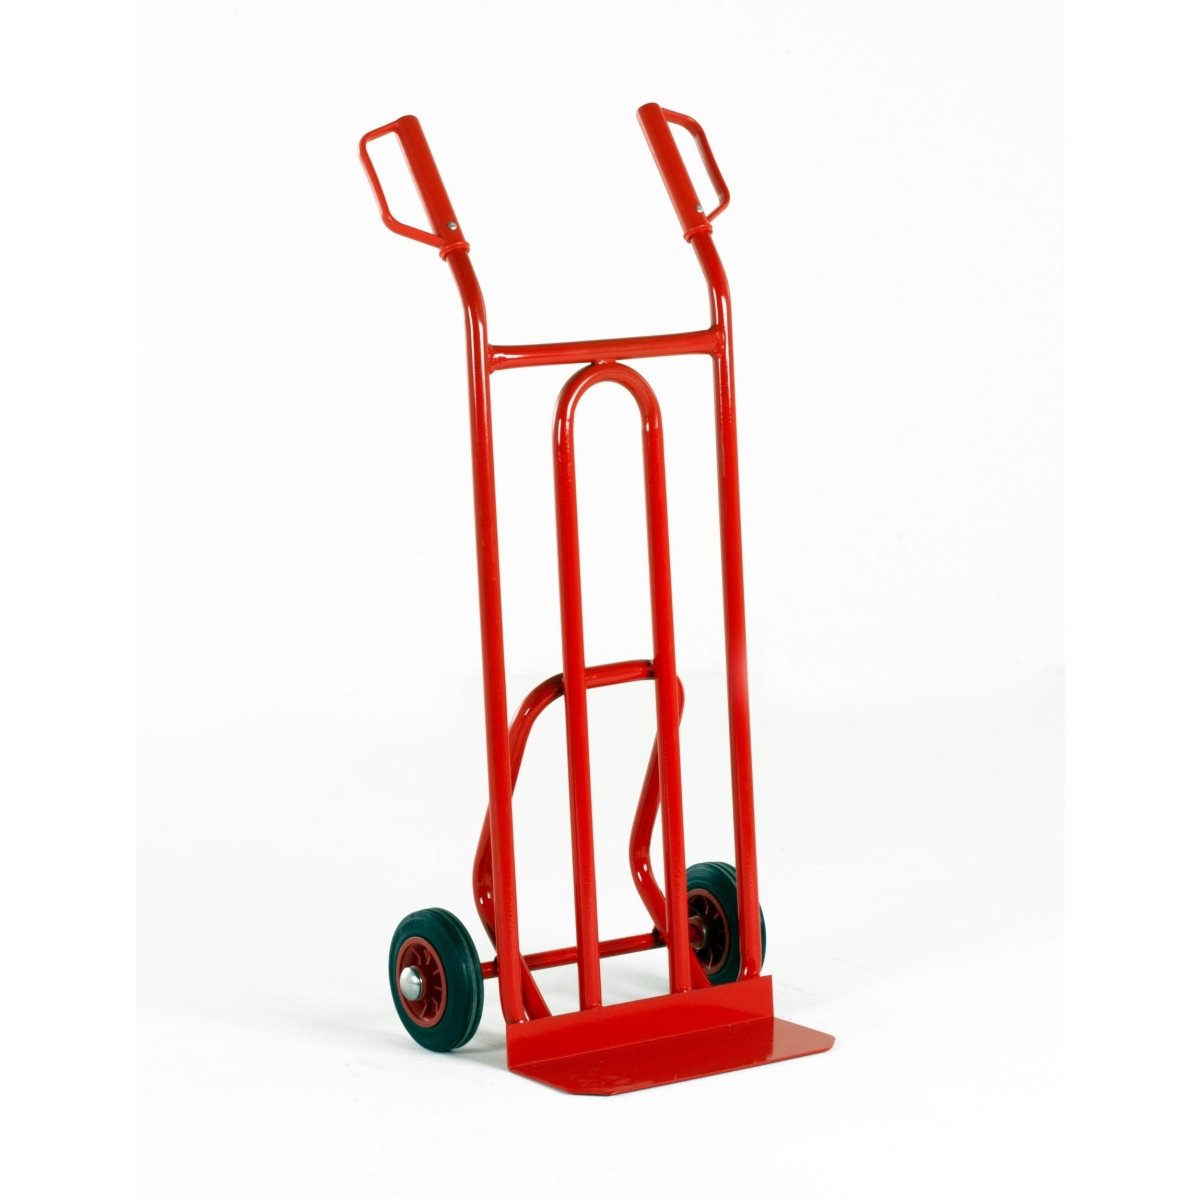 Loadtek Plated Sack Truck - Warehouse Storage Products